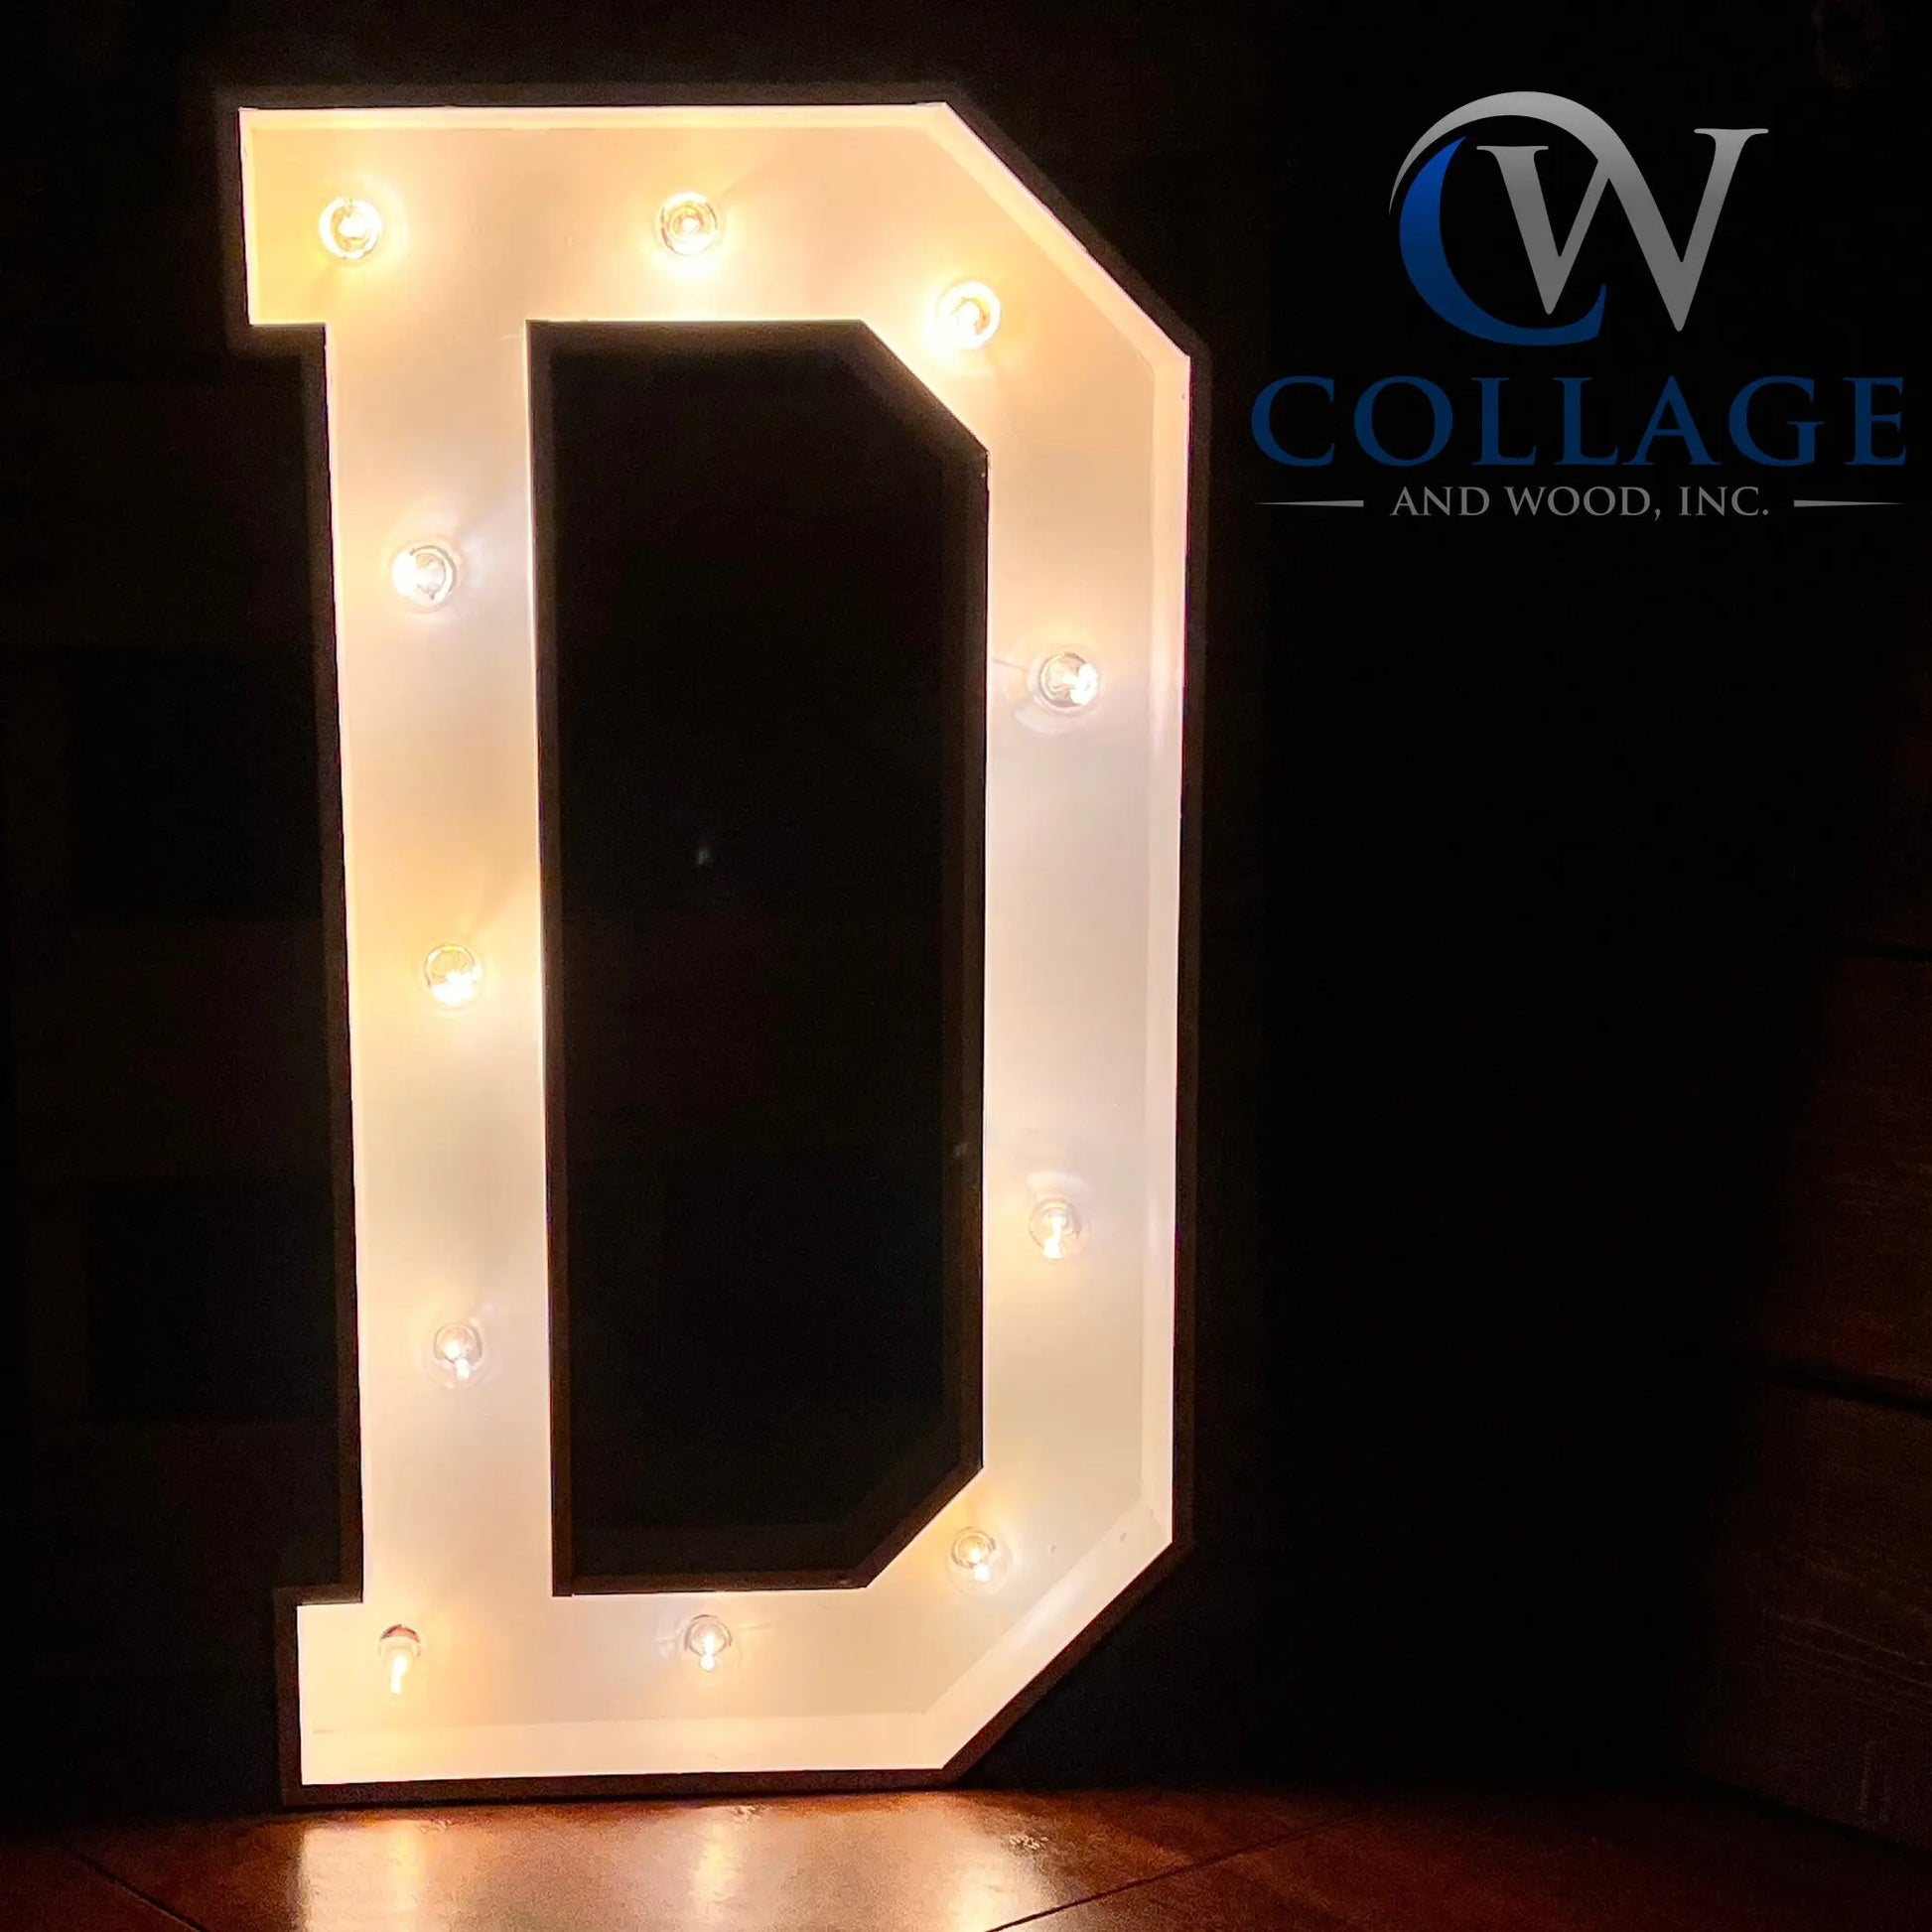 D - Dazzling wooden marquee letter D, stretching 3 feet tall, painted in a clean white hue, highlighted by radiant LED lights.